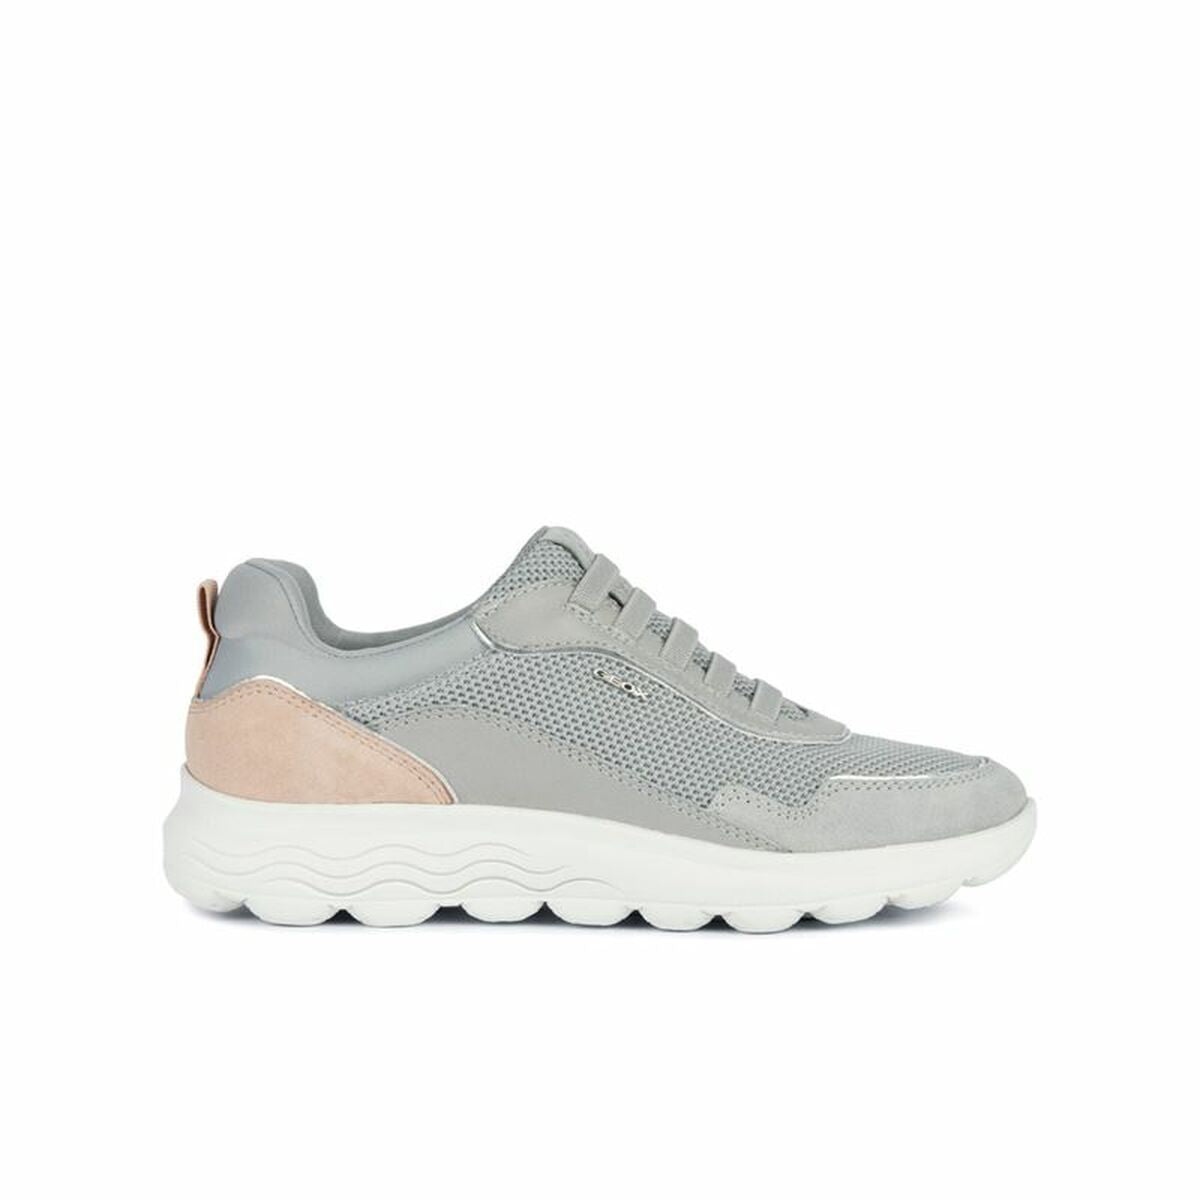 Sports Trainers for Women Geox D Spherica Grey